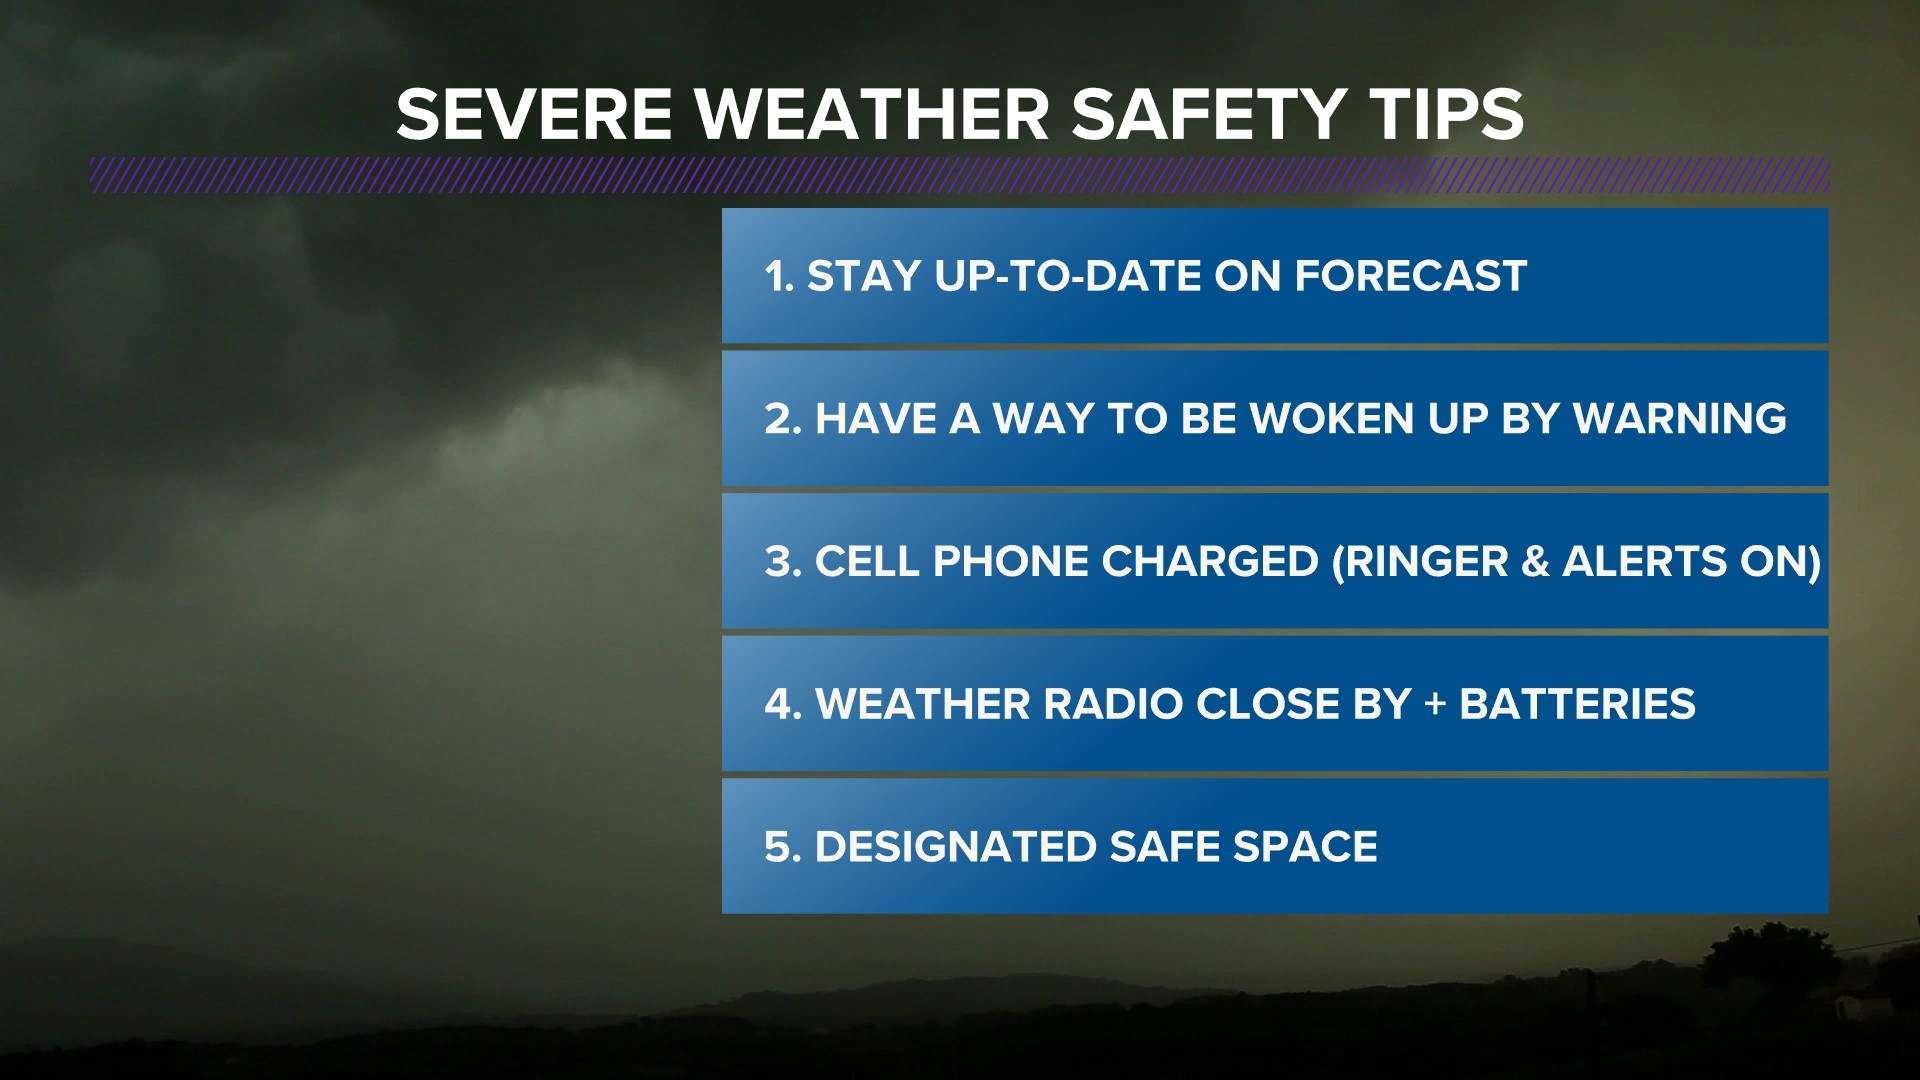 Severe weather can strike at any time day or night. Your cell phone weather alerts are crucial for you and your family get out of harms way.